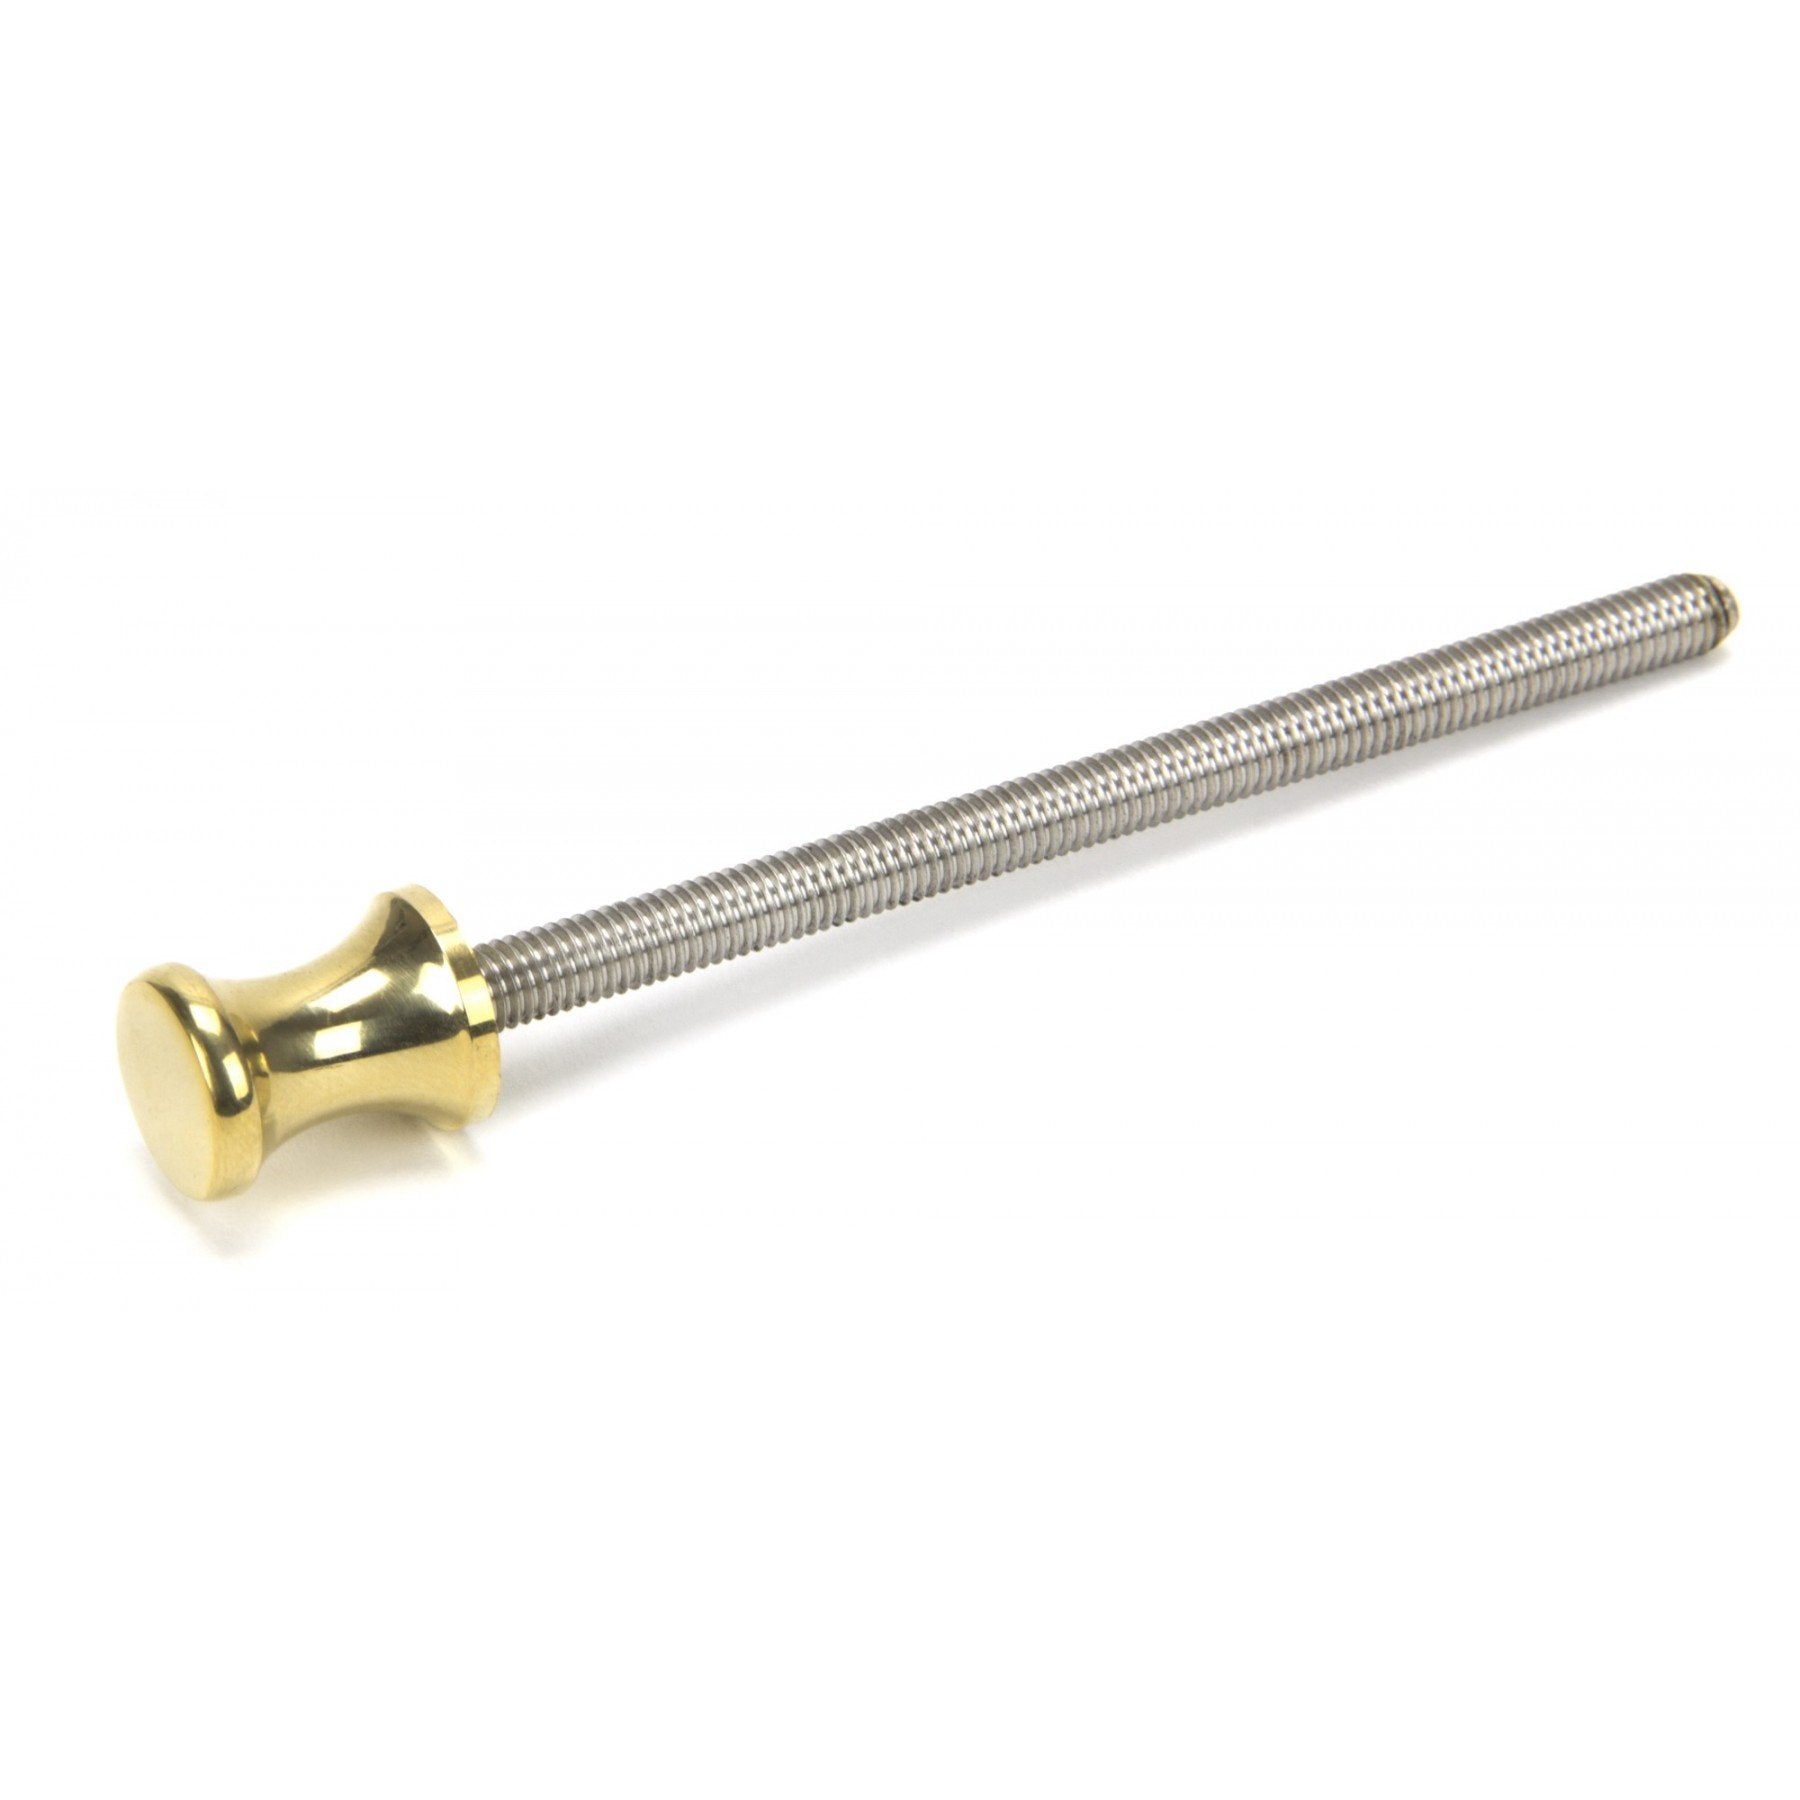 From the Anvil Polished Brass ended SS M6 110mm Threaded Bar - No.42 Interiors